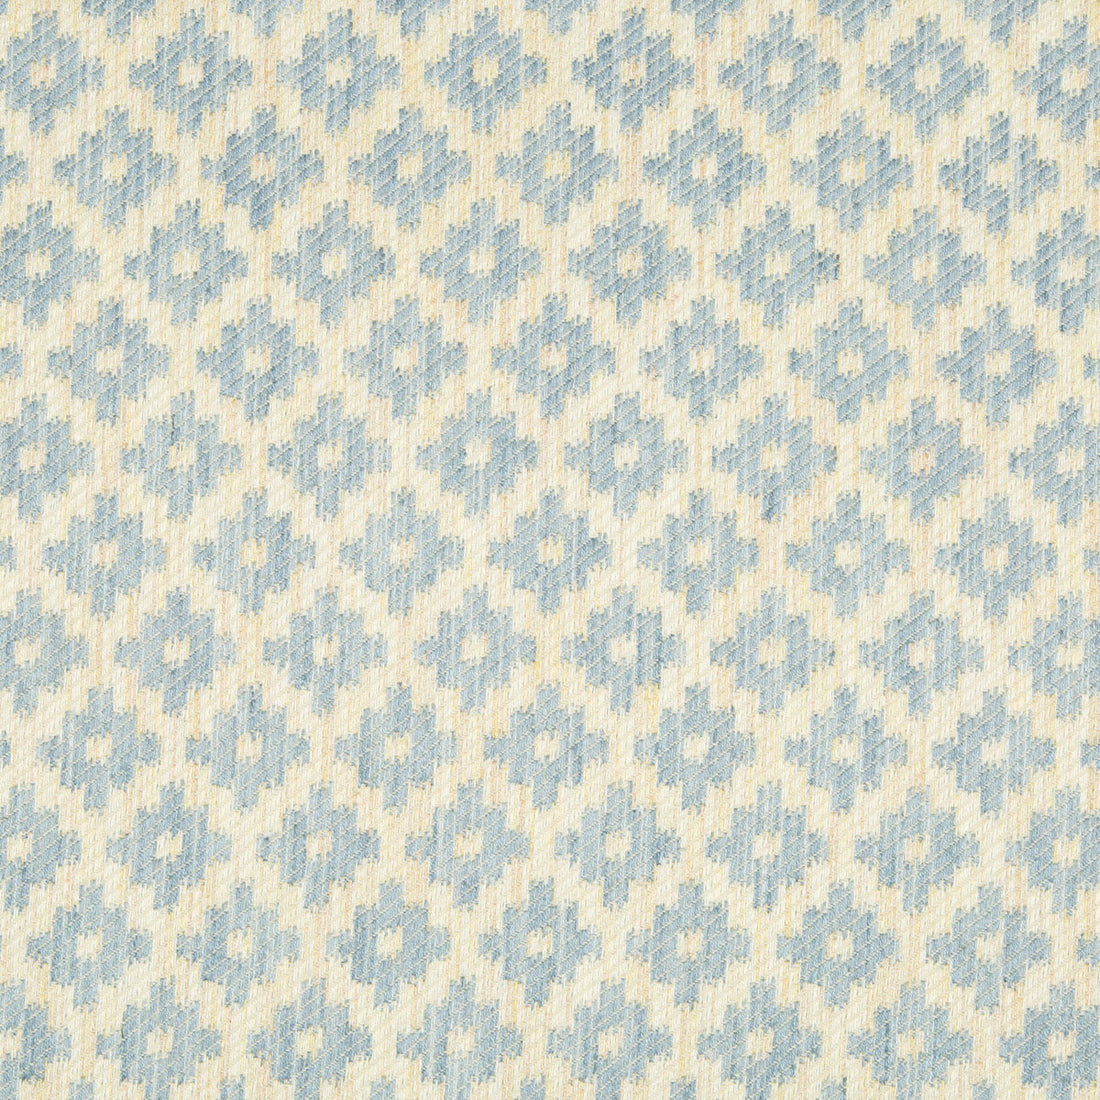 Baronet Strie fabric in sky color - pattern 8017142.15.0 - by Brunschwig &amp; Fils in the Baronet collection